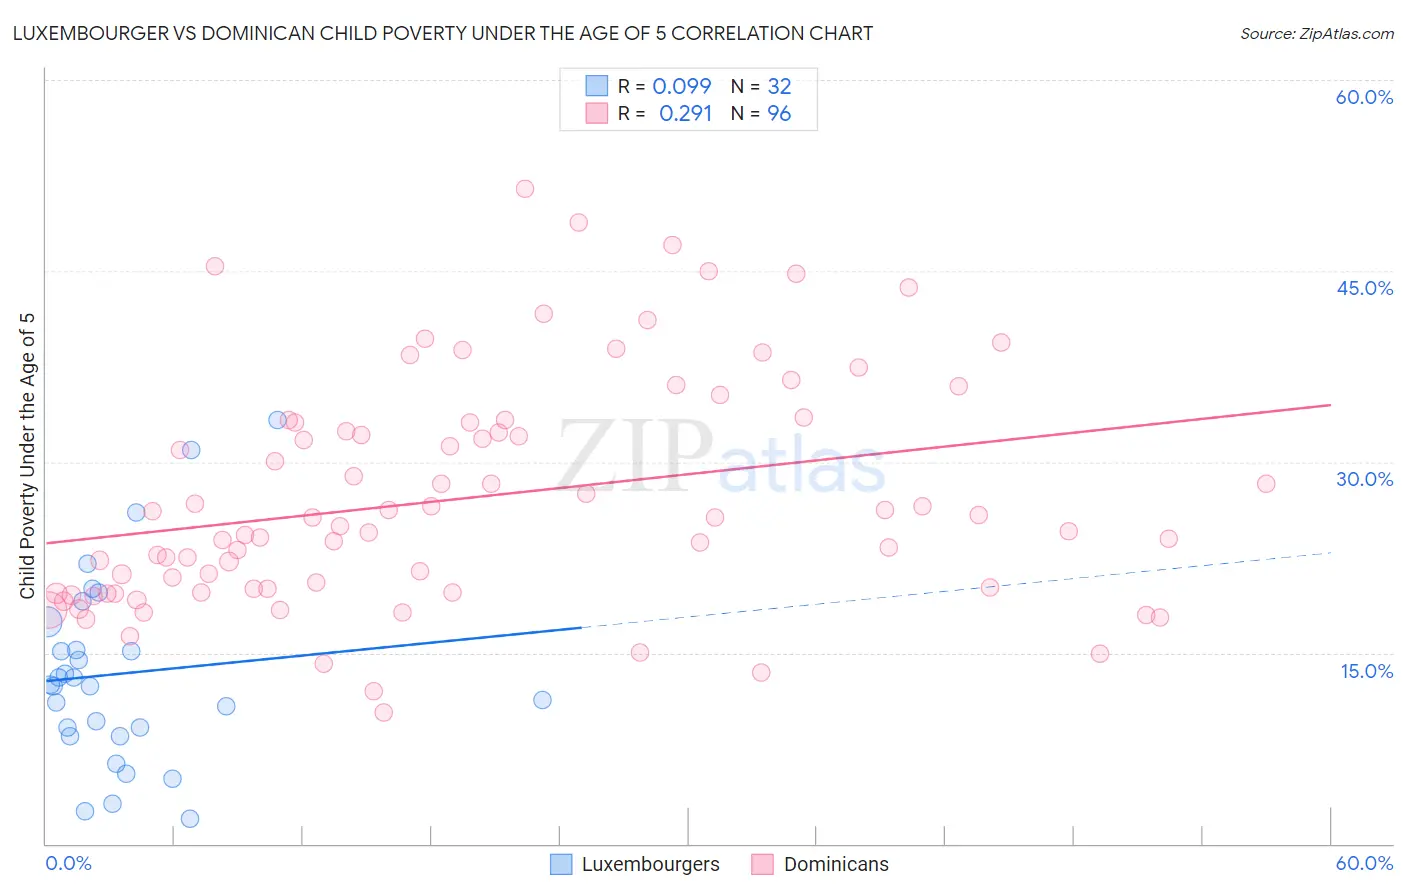 Luxembourger vs Dominican Child Poverty Under the Age of 5